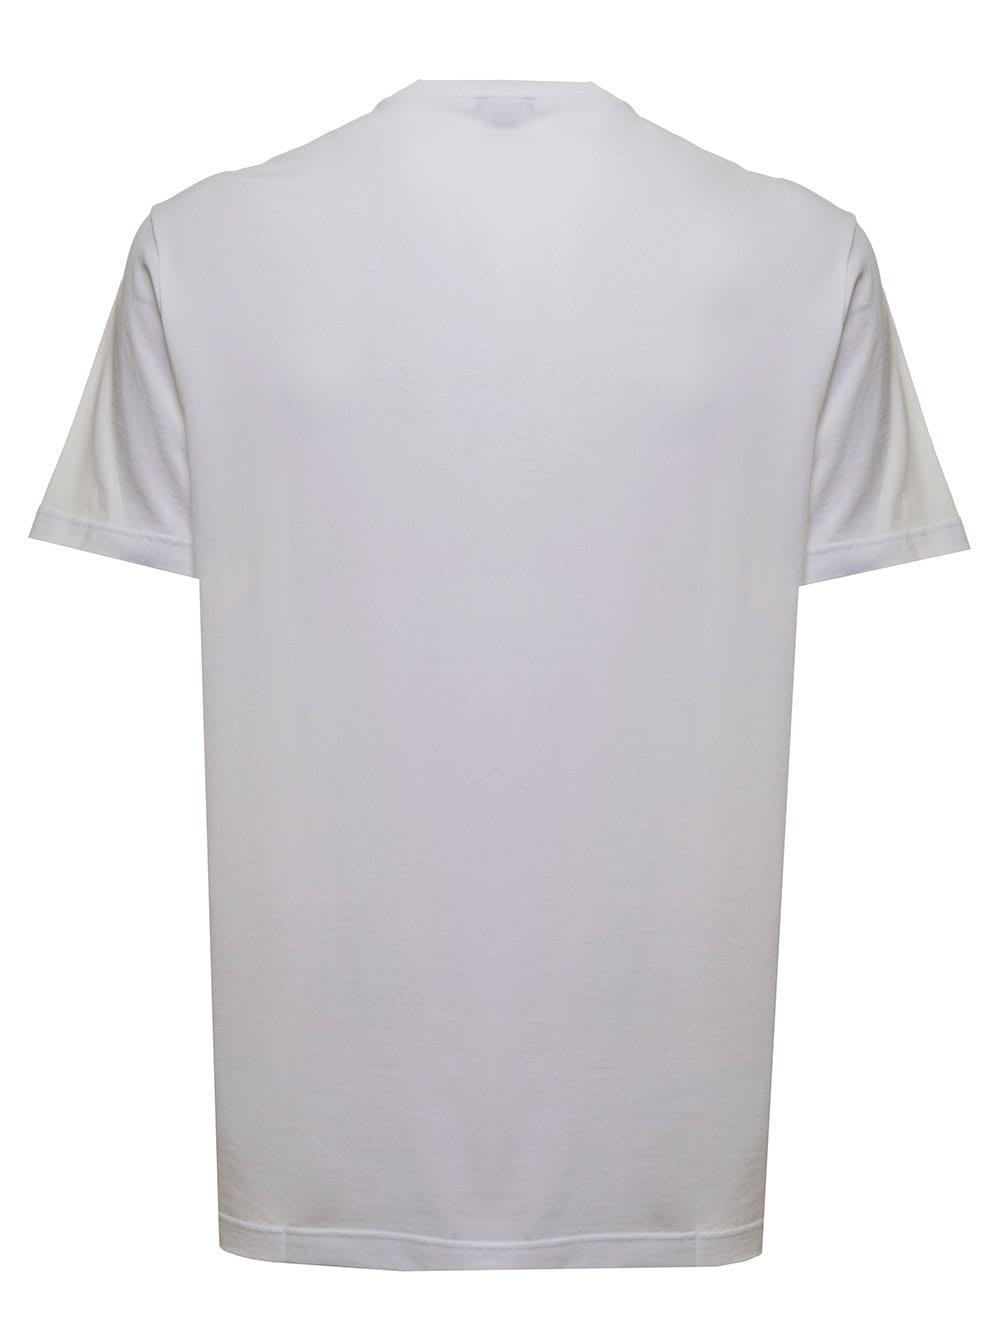 Versace S Cotton T-shirt With Logo Print in White for Men - Lyst